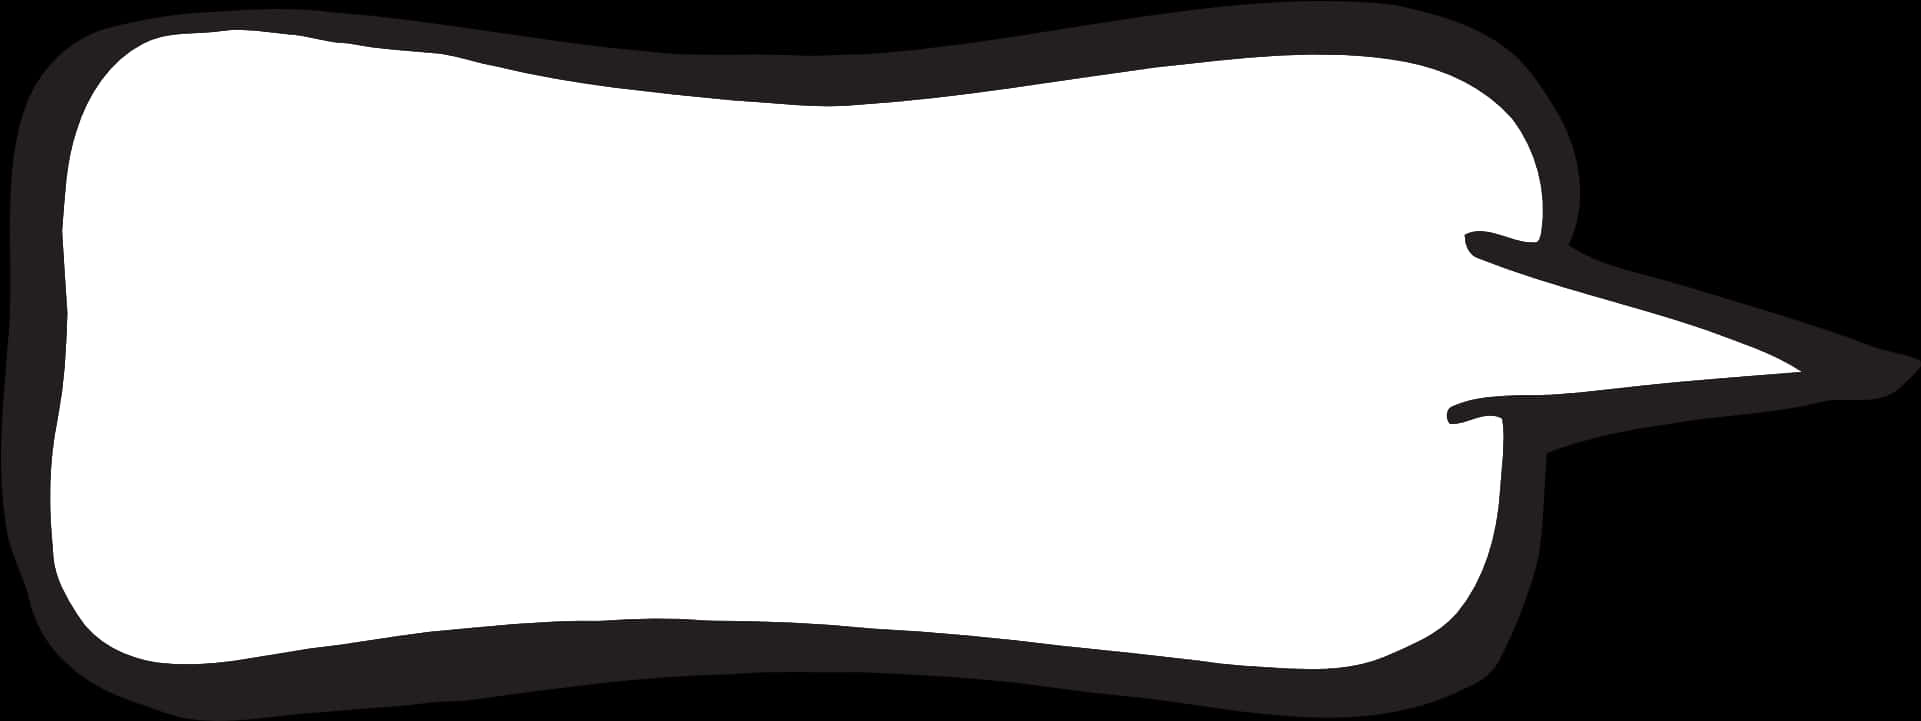 Thought Bubble Blank Comic Element PNG